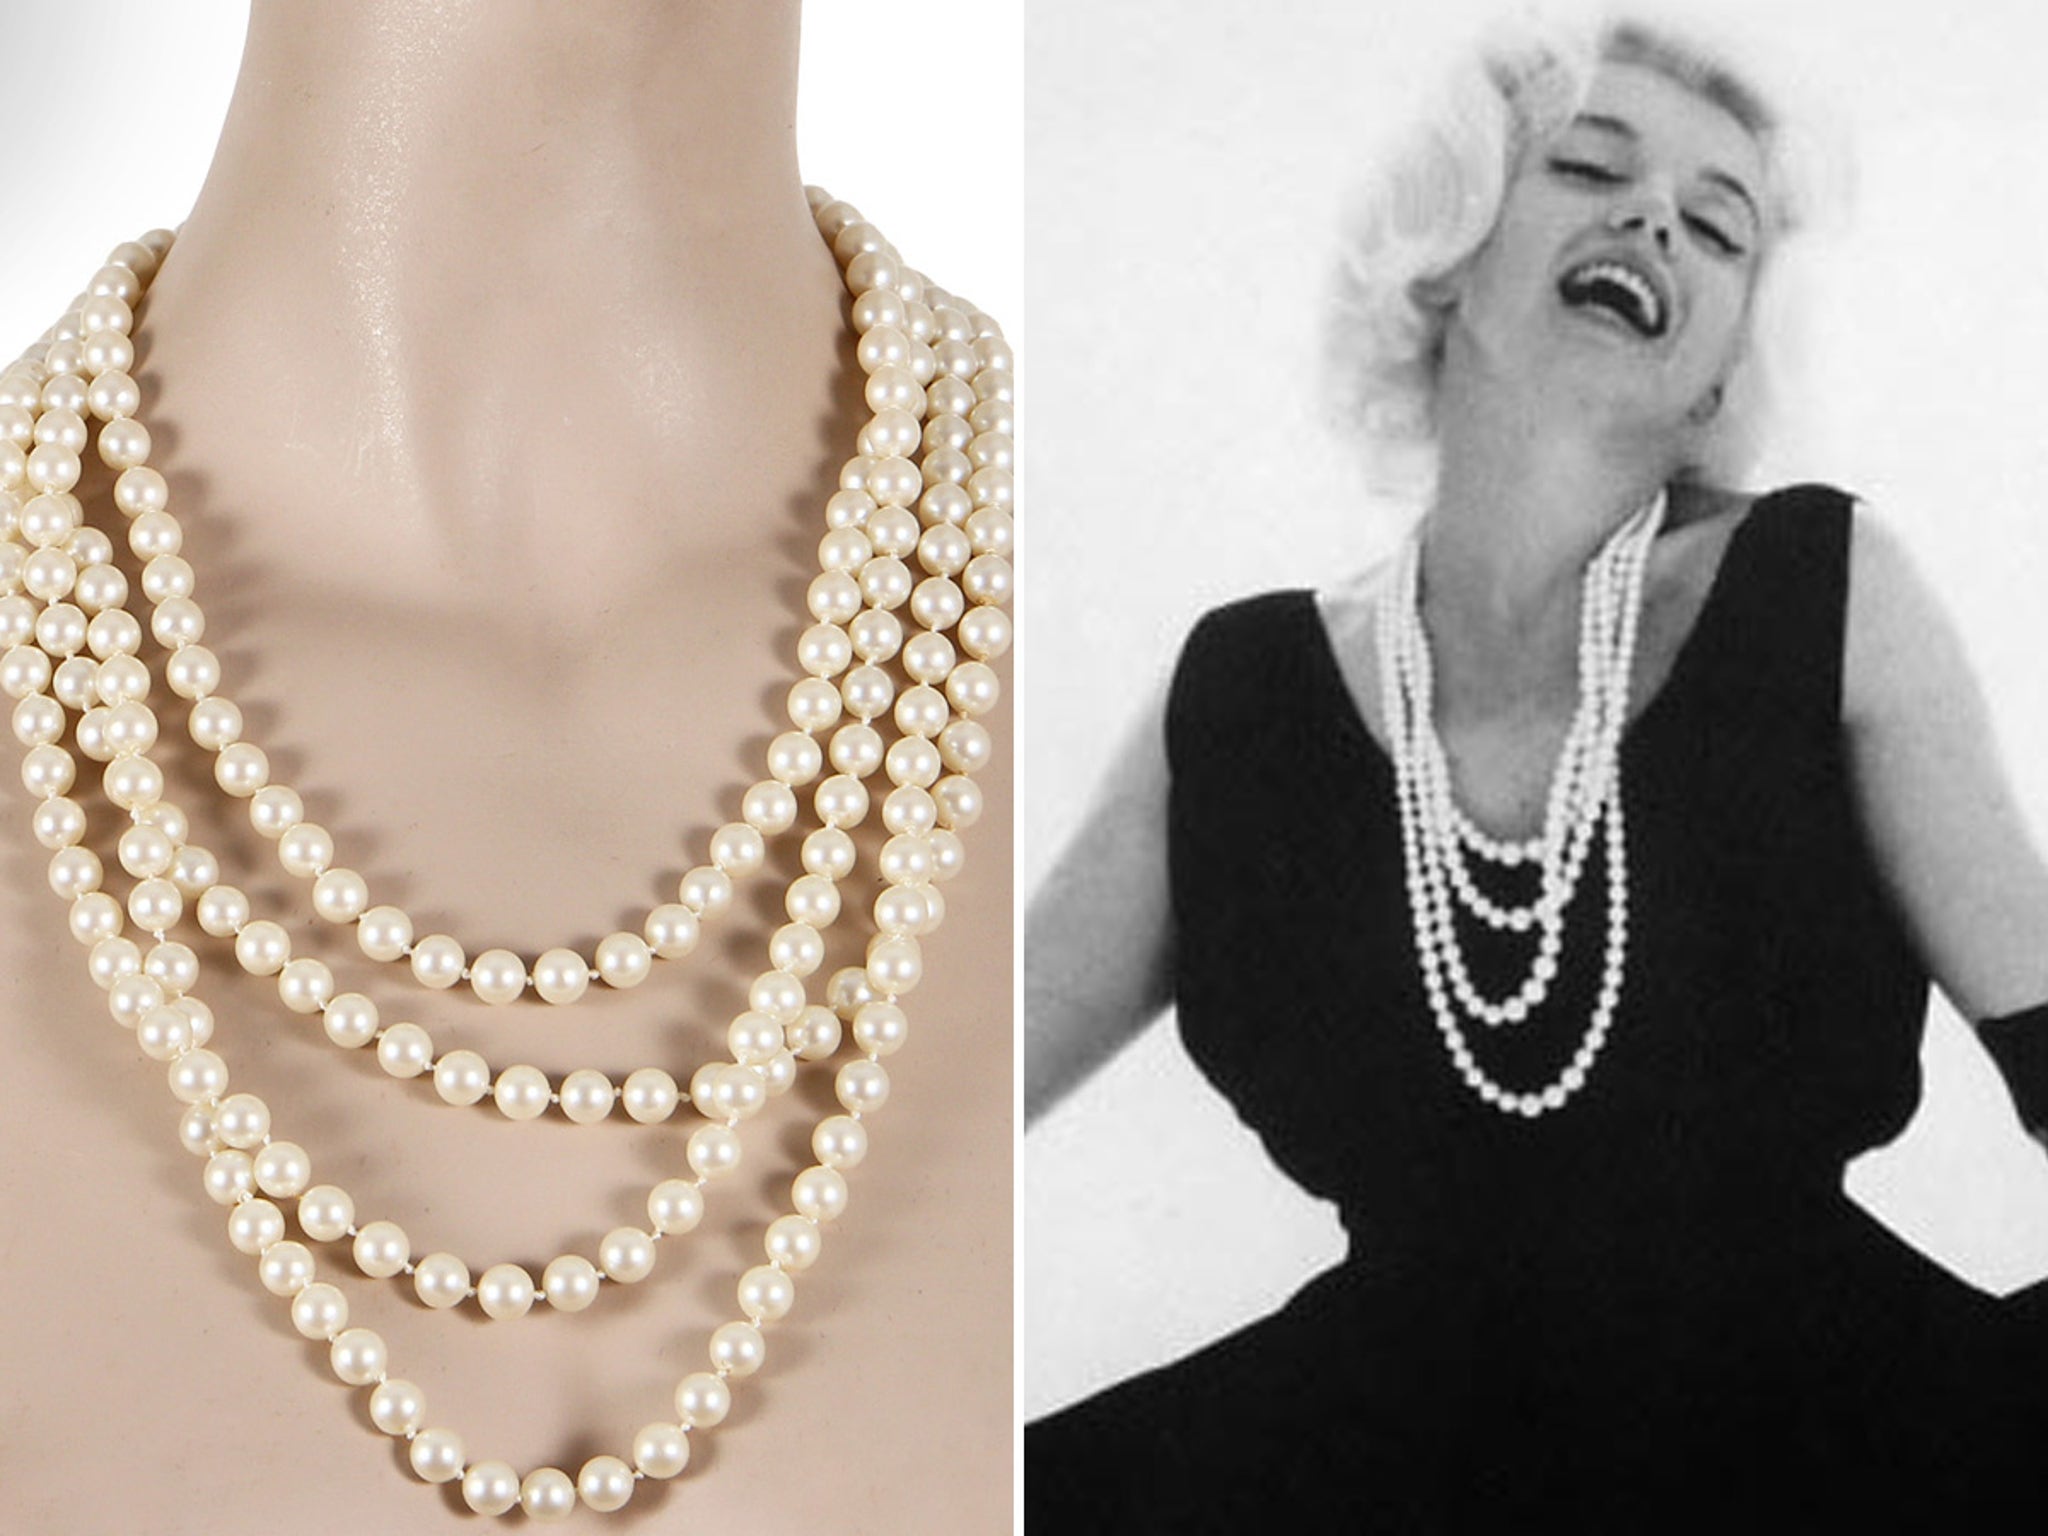 Marilyn Monroe 8Inch x 10Inch Photo Some Like It Hot The Seven Year Itch  Gentlemen Prefer Blondes Head Shot Dangling Beaded Necklace Across Face kn  at Amazon's Entertainment Collectibles Store